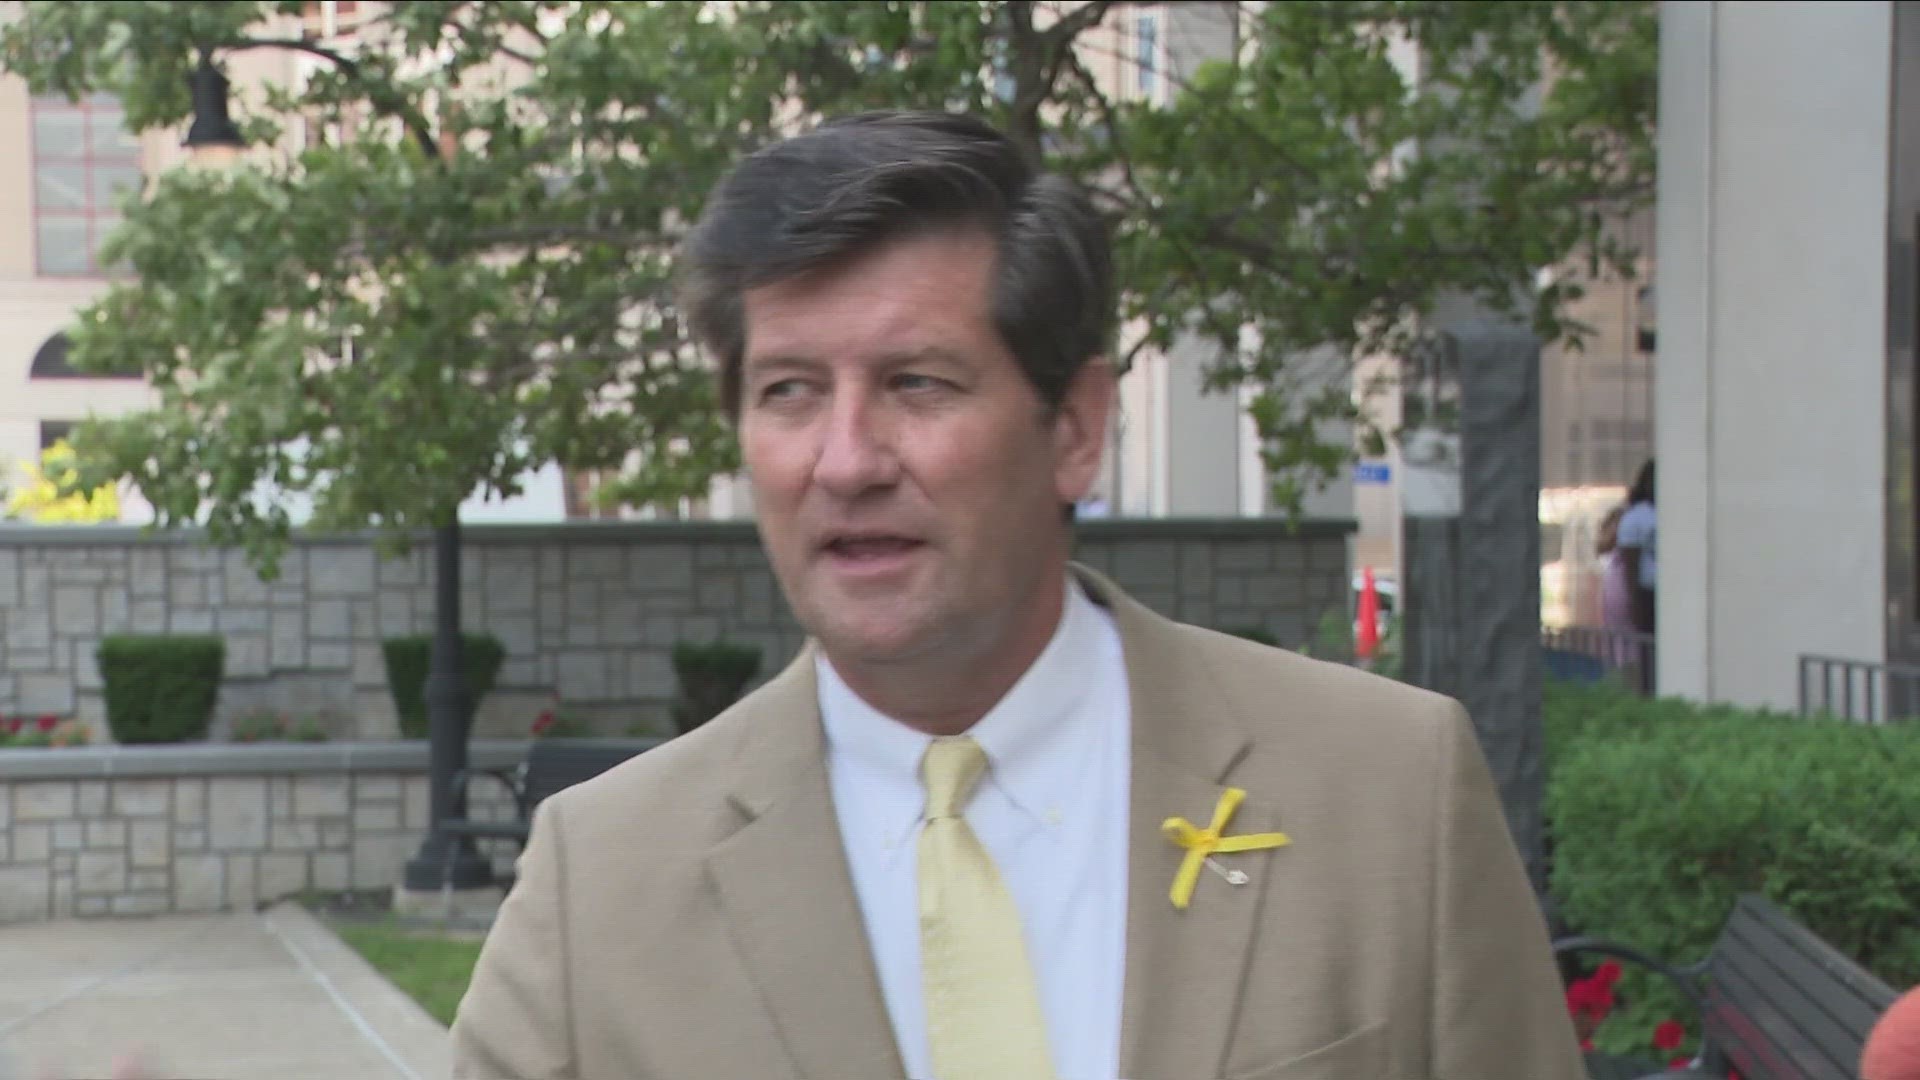 Mark Poloncarz has denied wrongdoing... no charges have been filed... and the Erie County District Attorney's Office says it is not investigating.